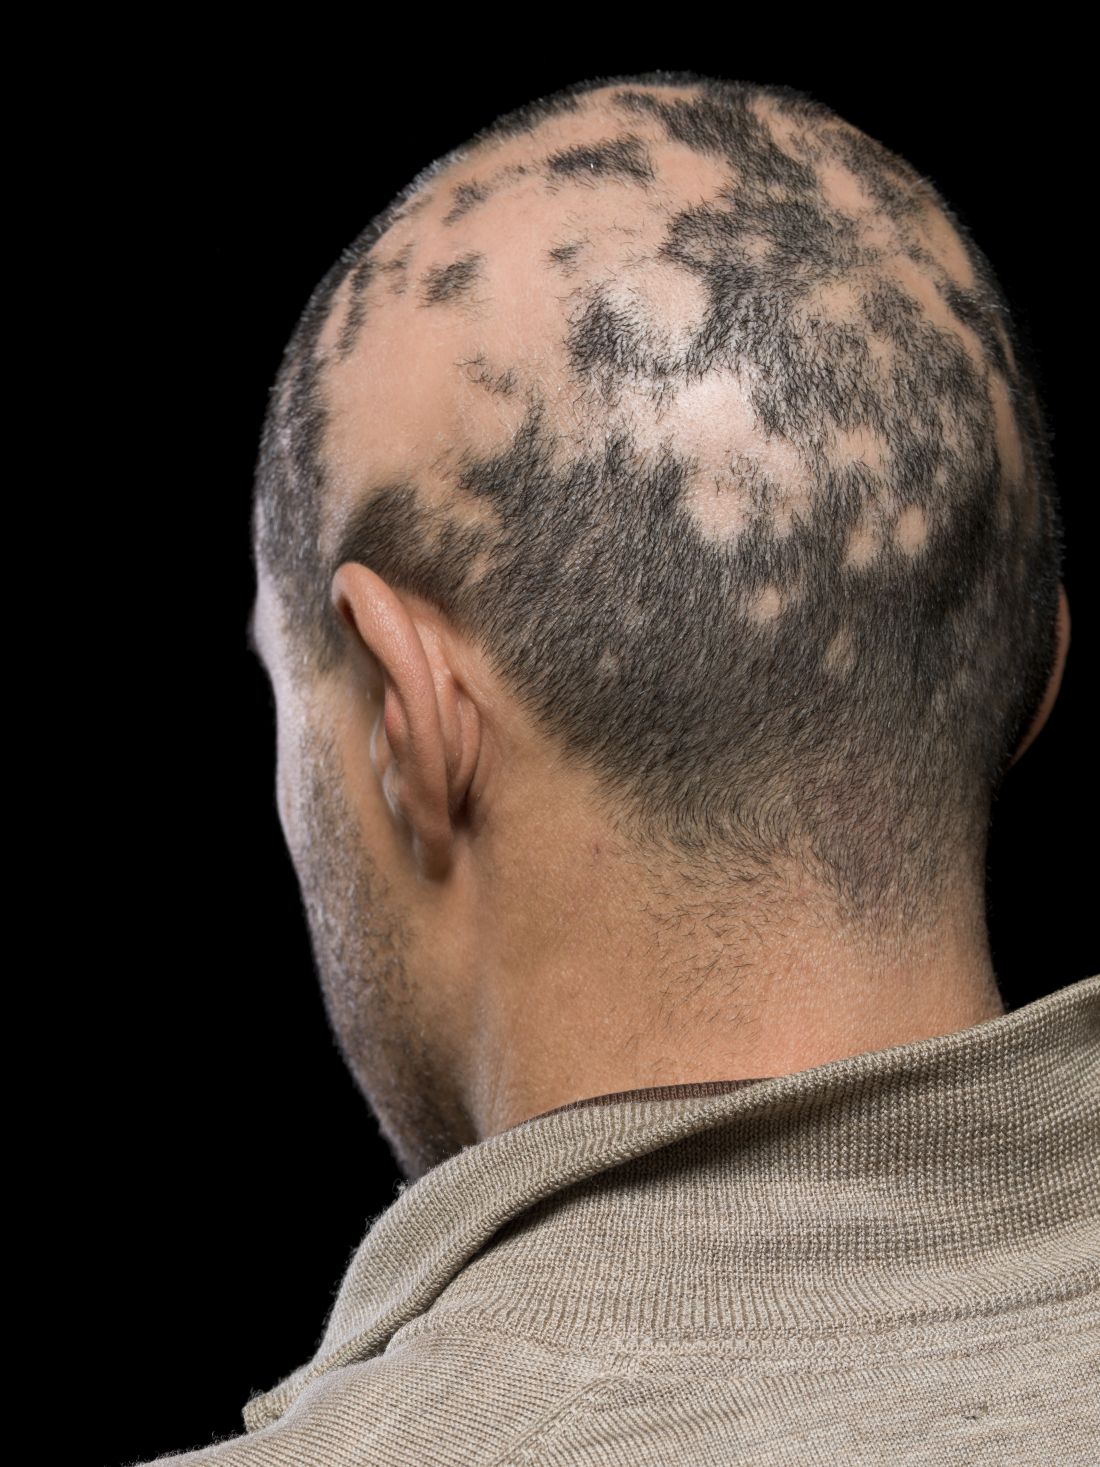 Current Alopecia Areata Options Include Old And New Therapies Mdedge